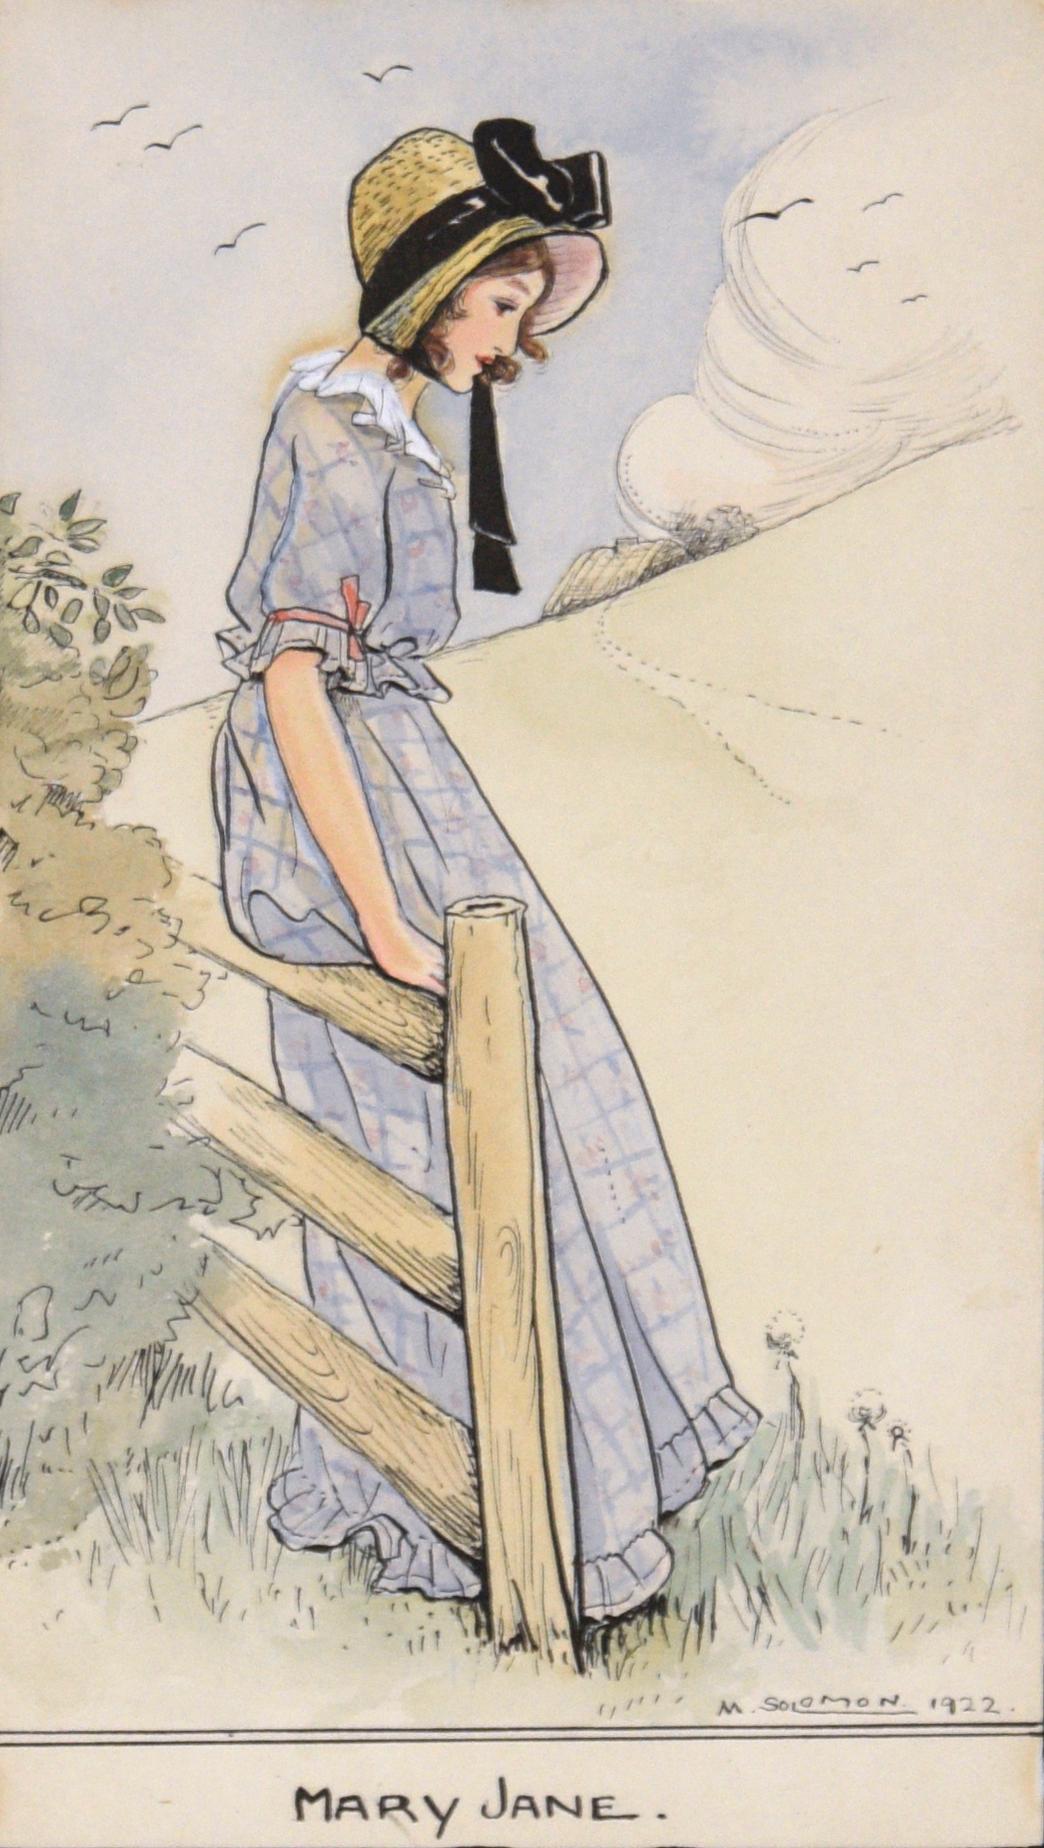 1920's Illustration of a Country Girl - Art by M. Solomon